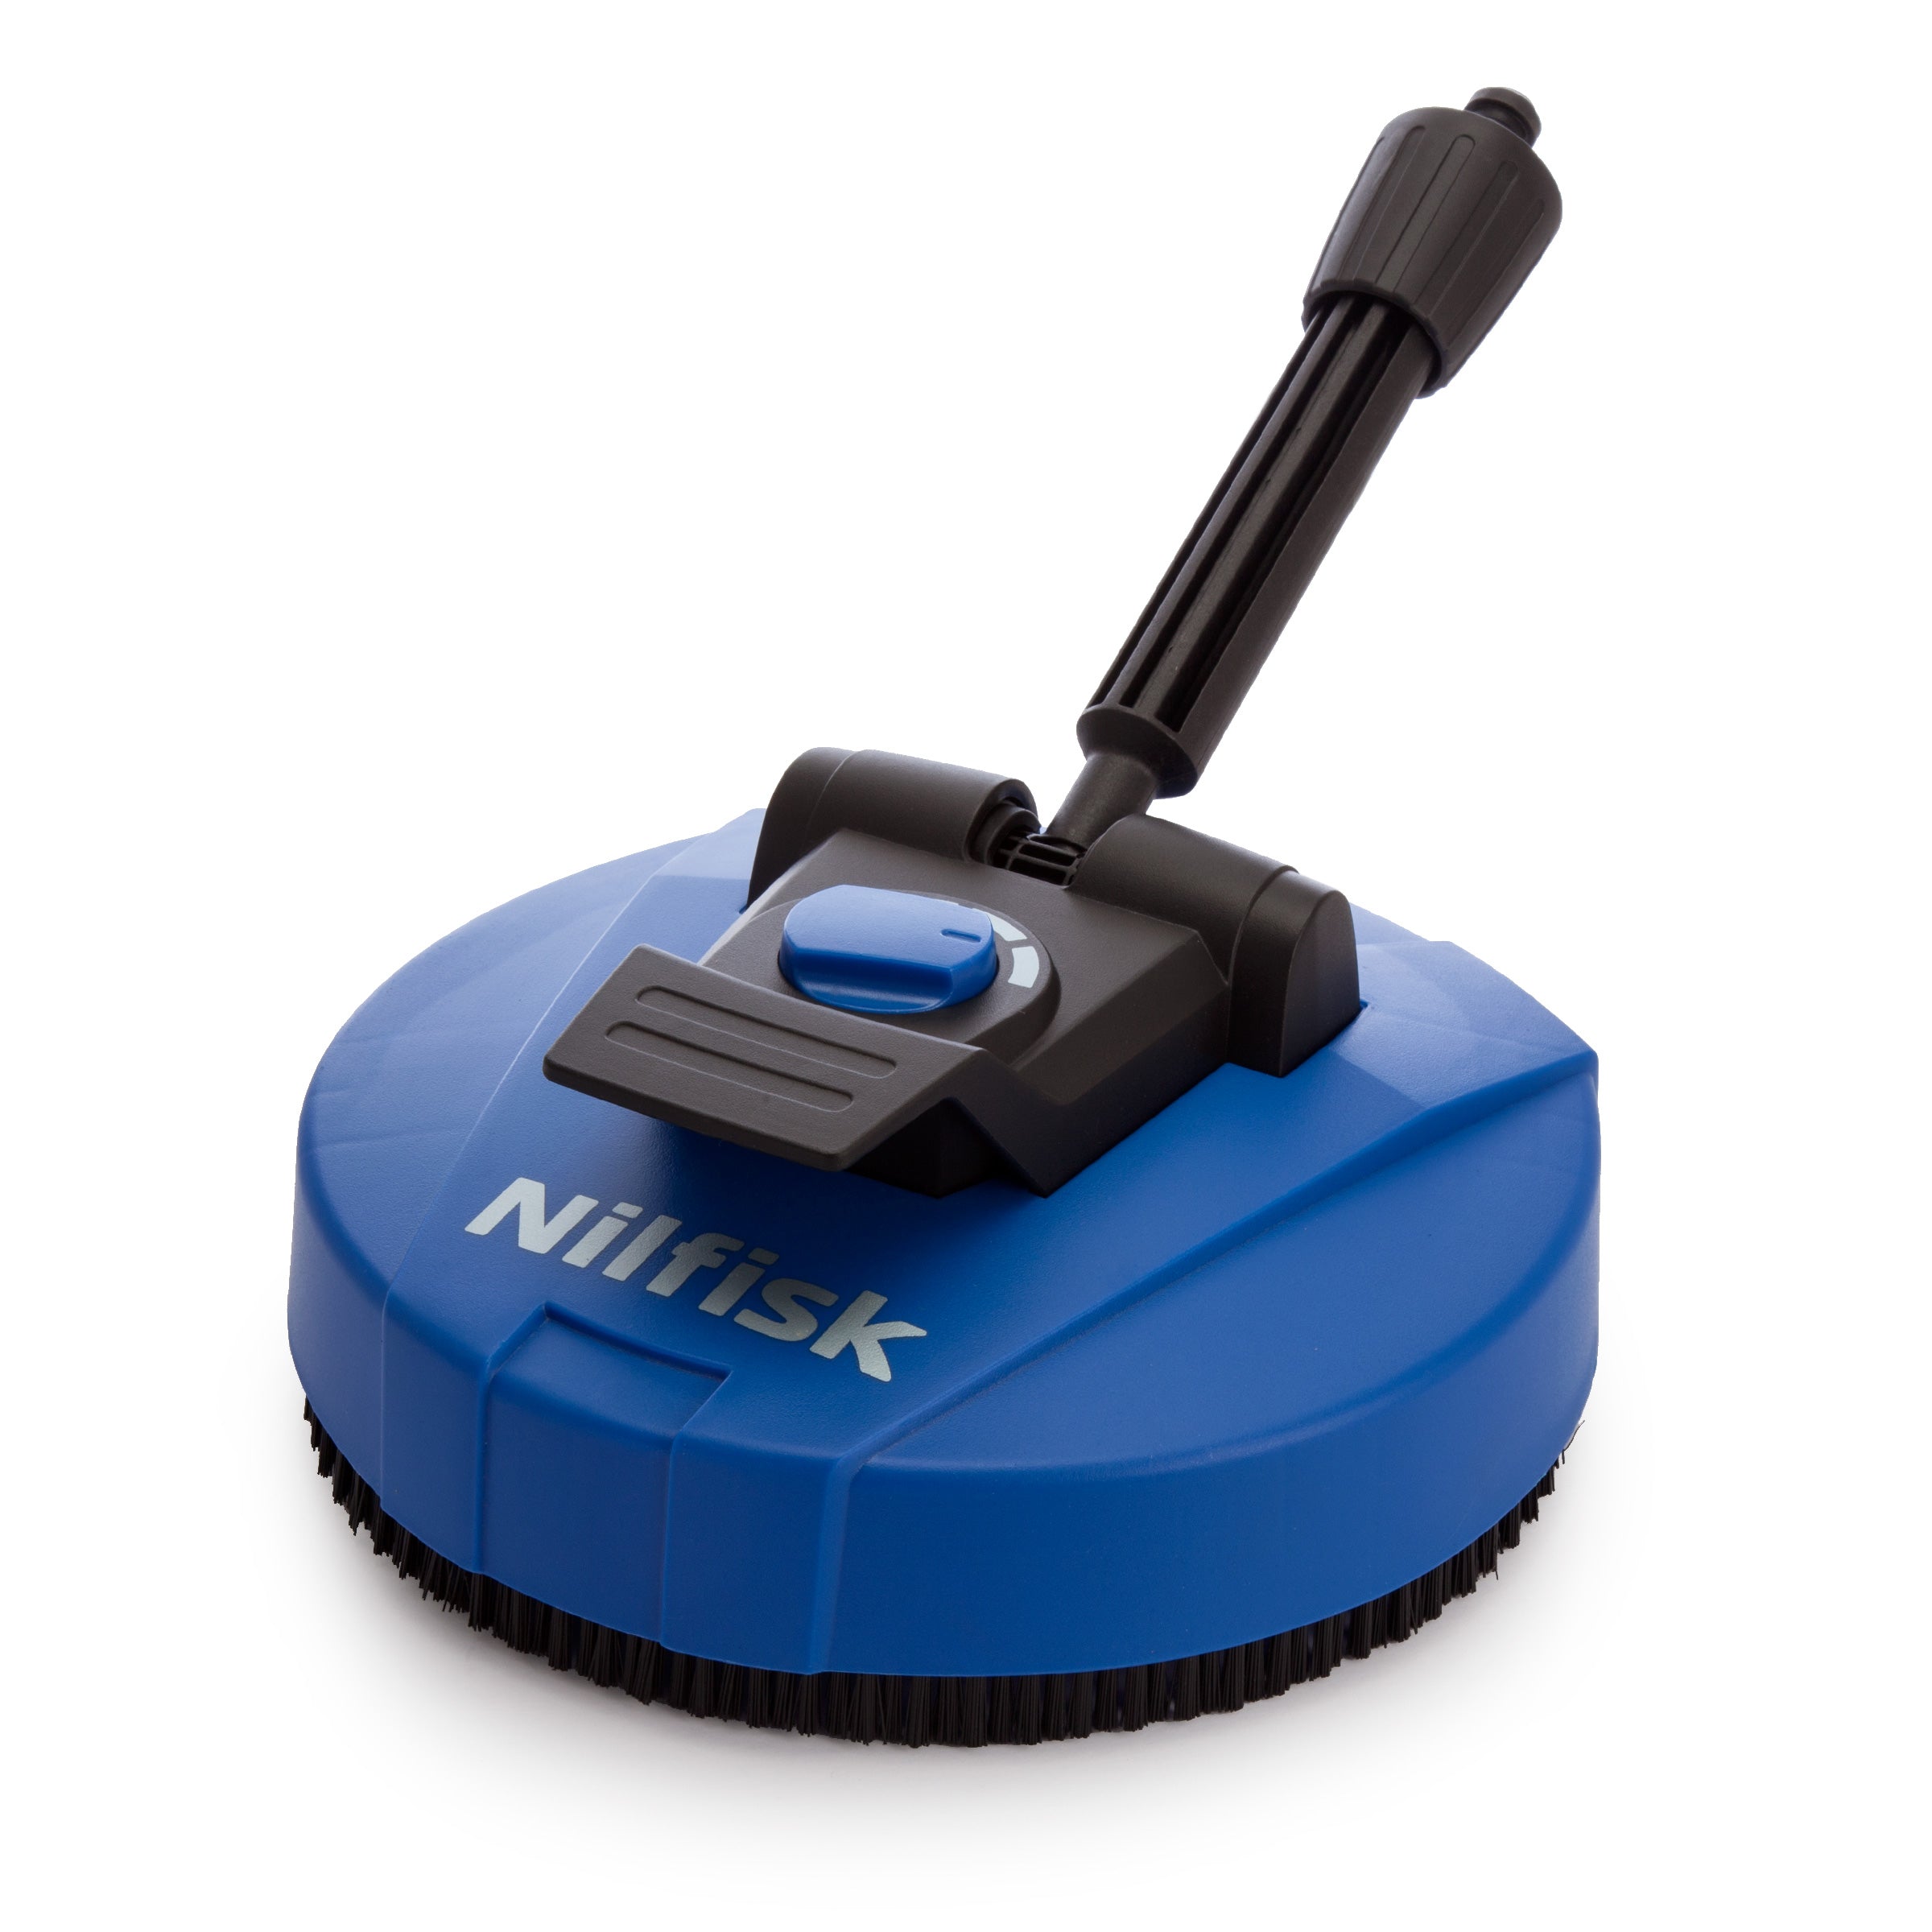 Nilfisk patio cleaner accessory for pressure - Fits Compact, D